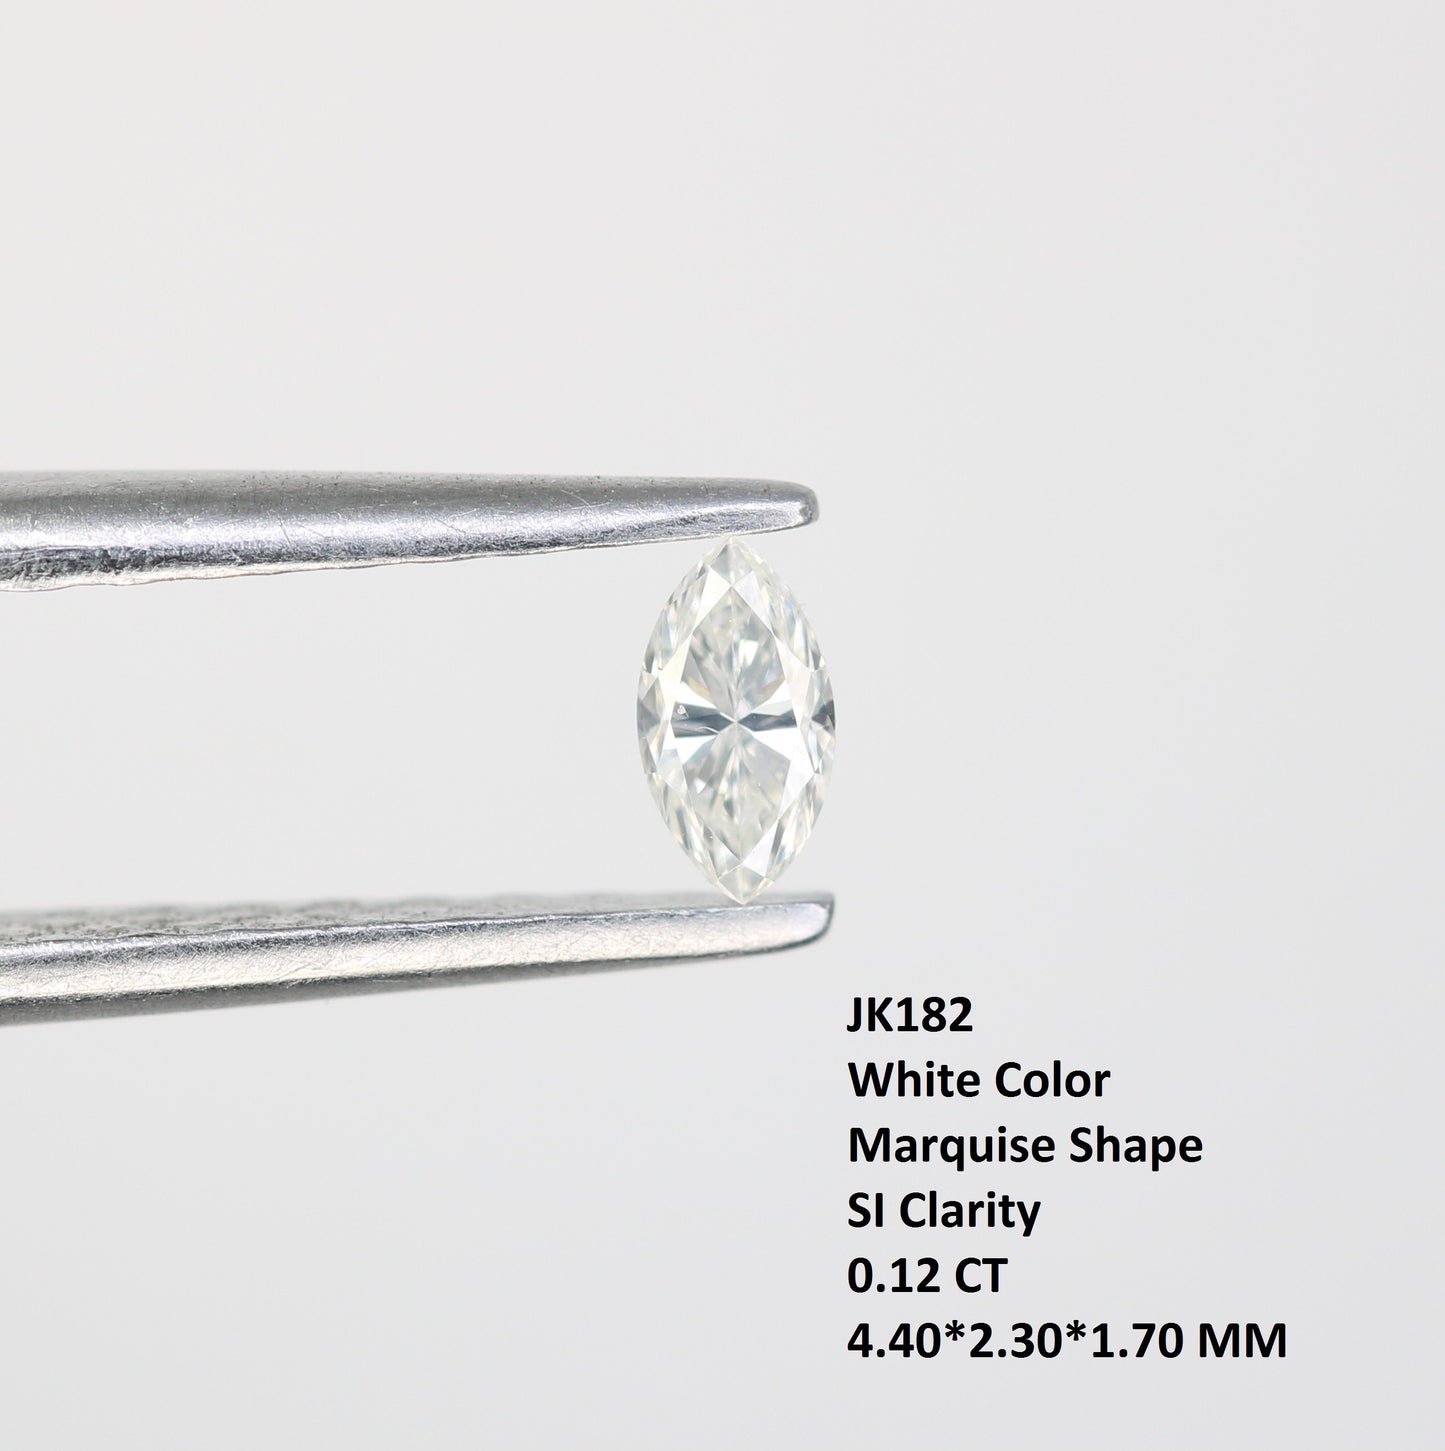 0.12 CT White Marquise Cut Natural Diamond For Engagement Ring